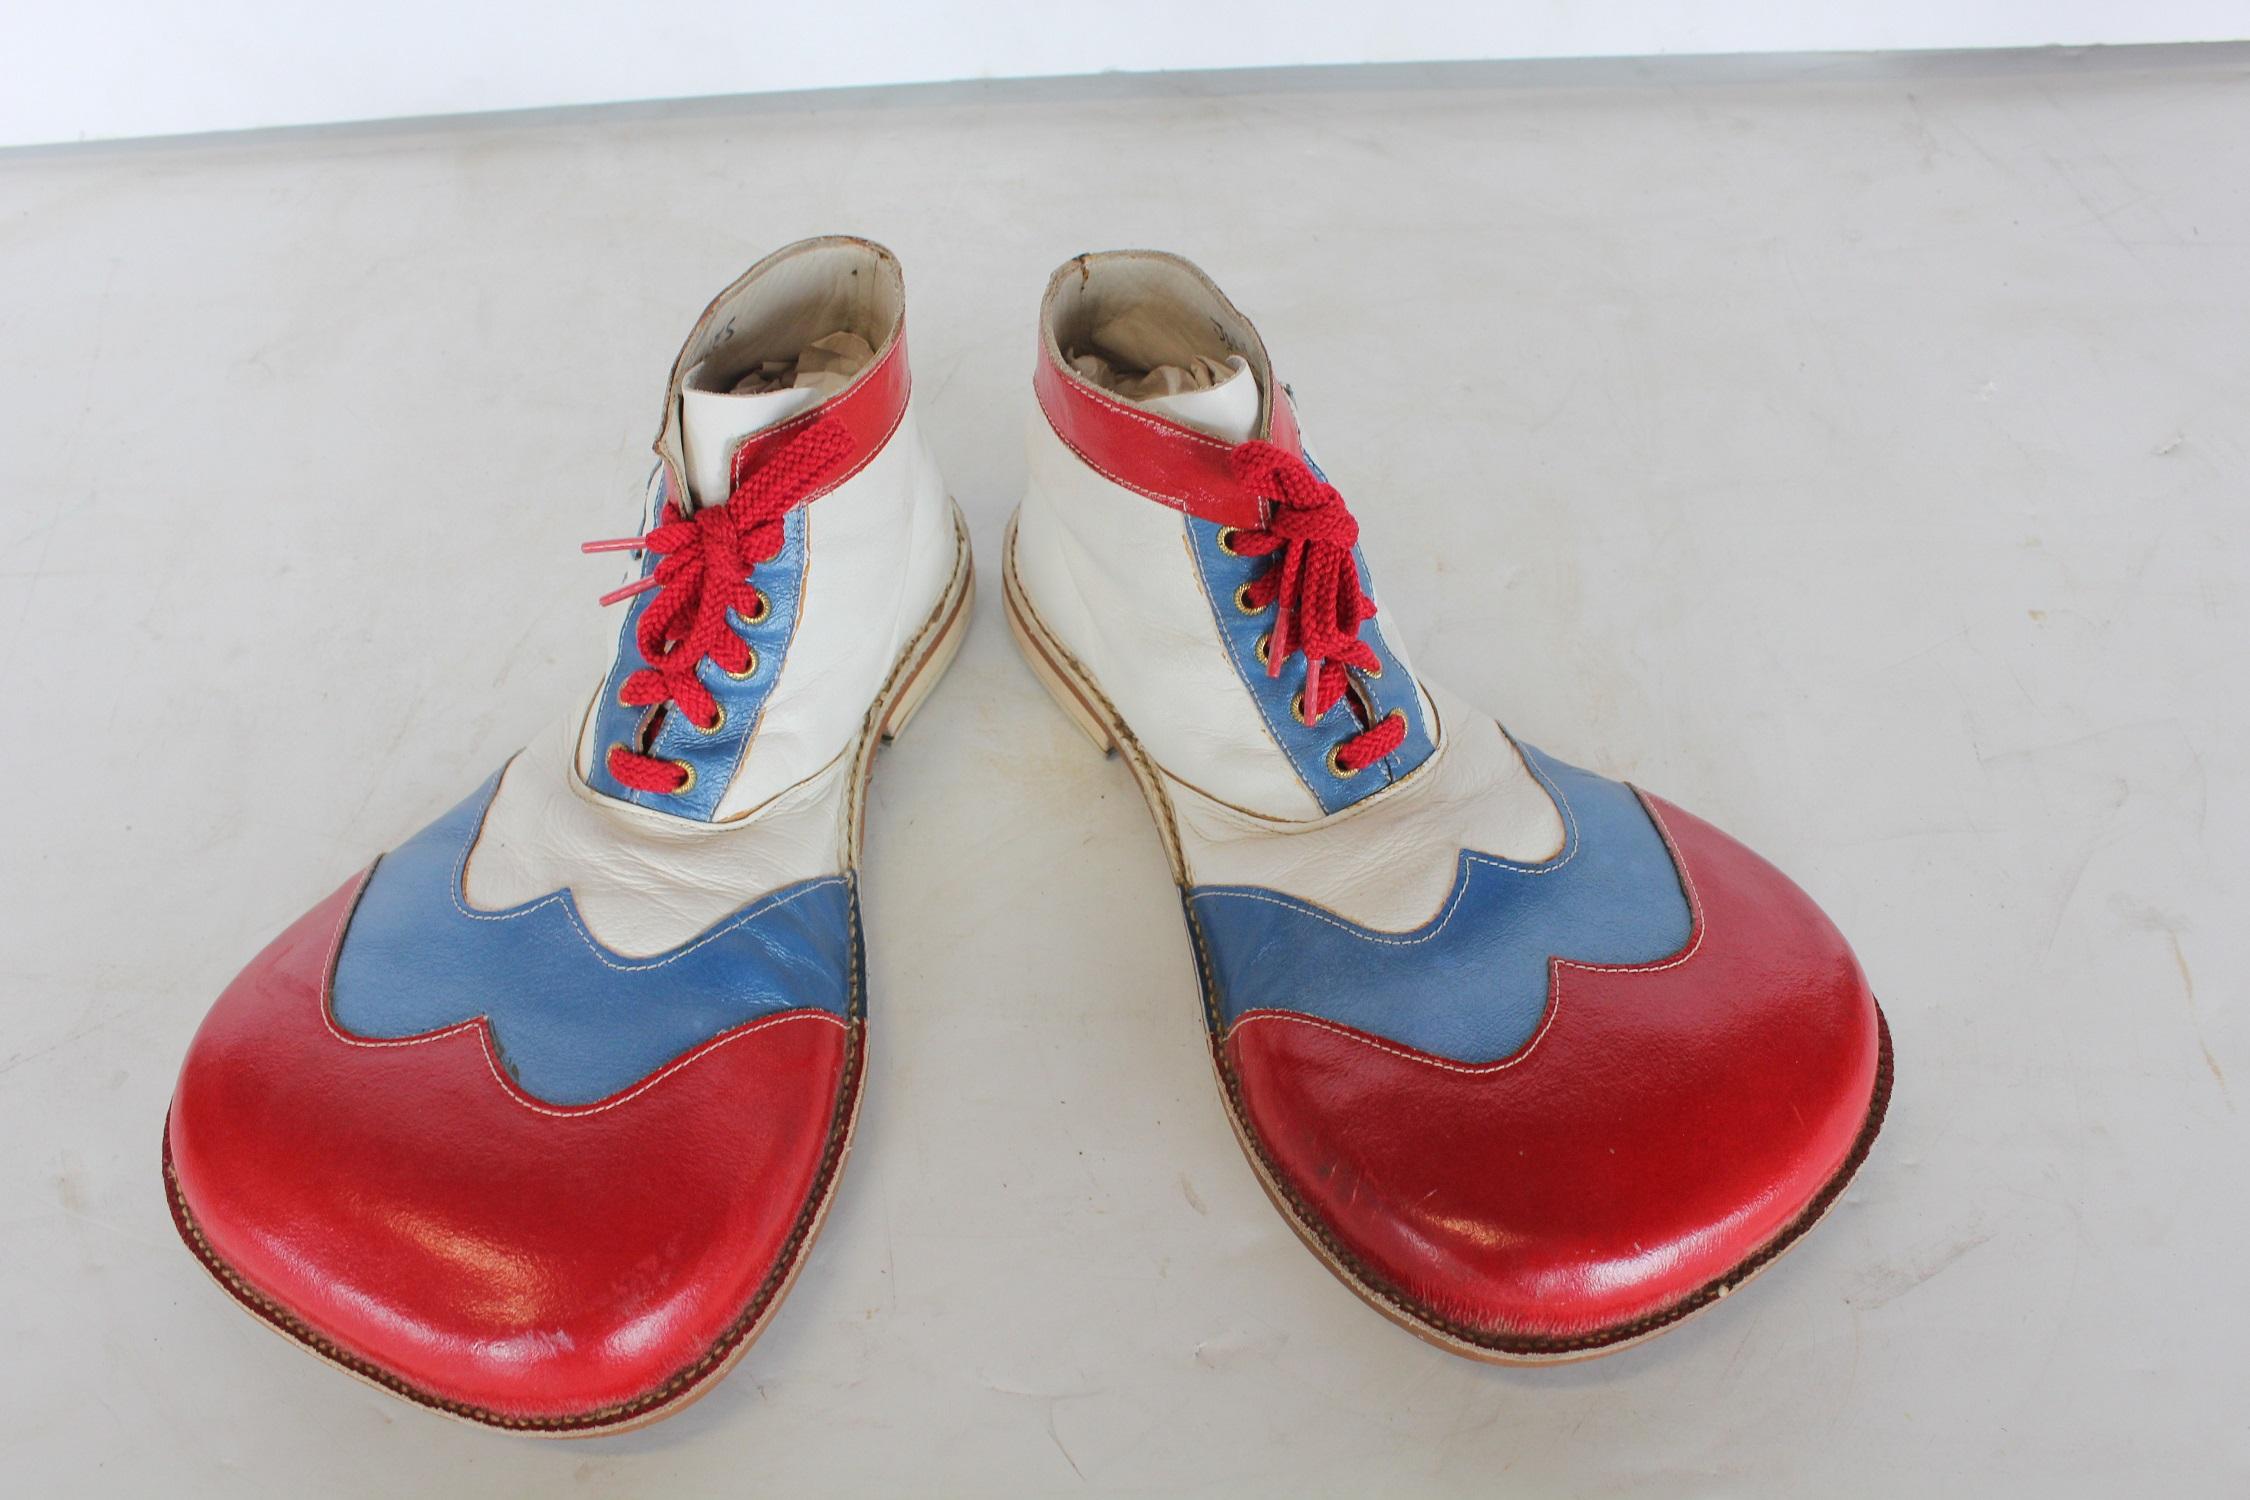 1950s clown leather shoes.